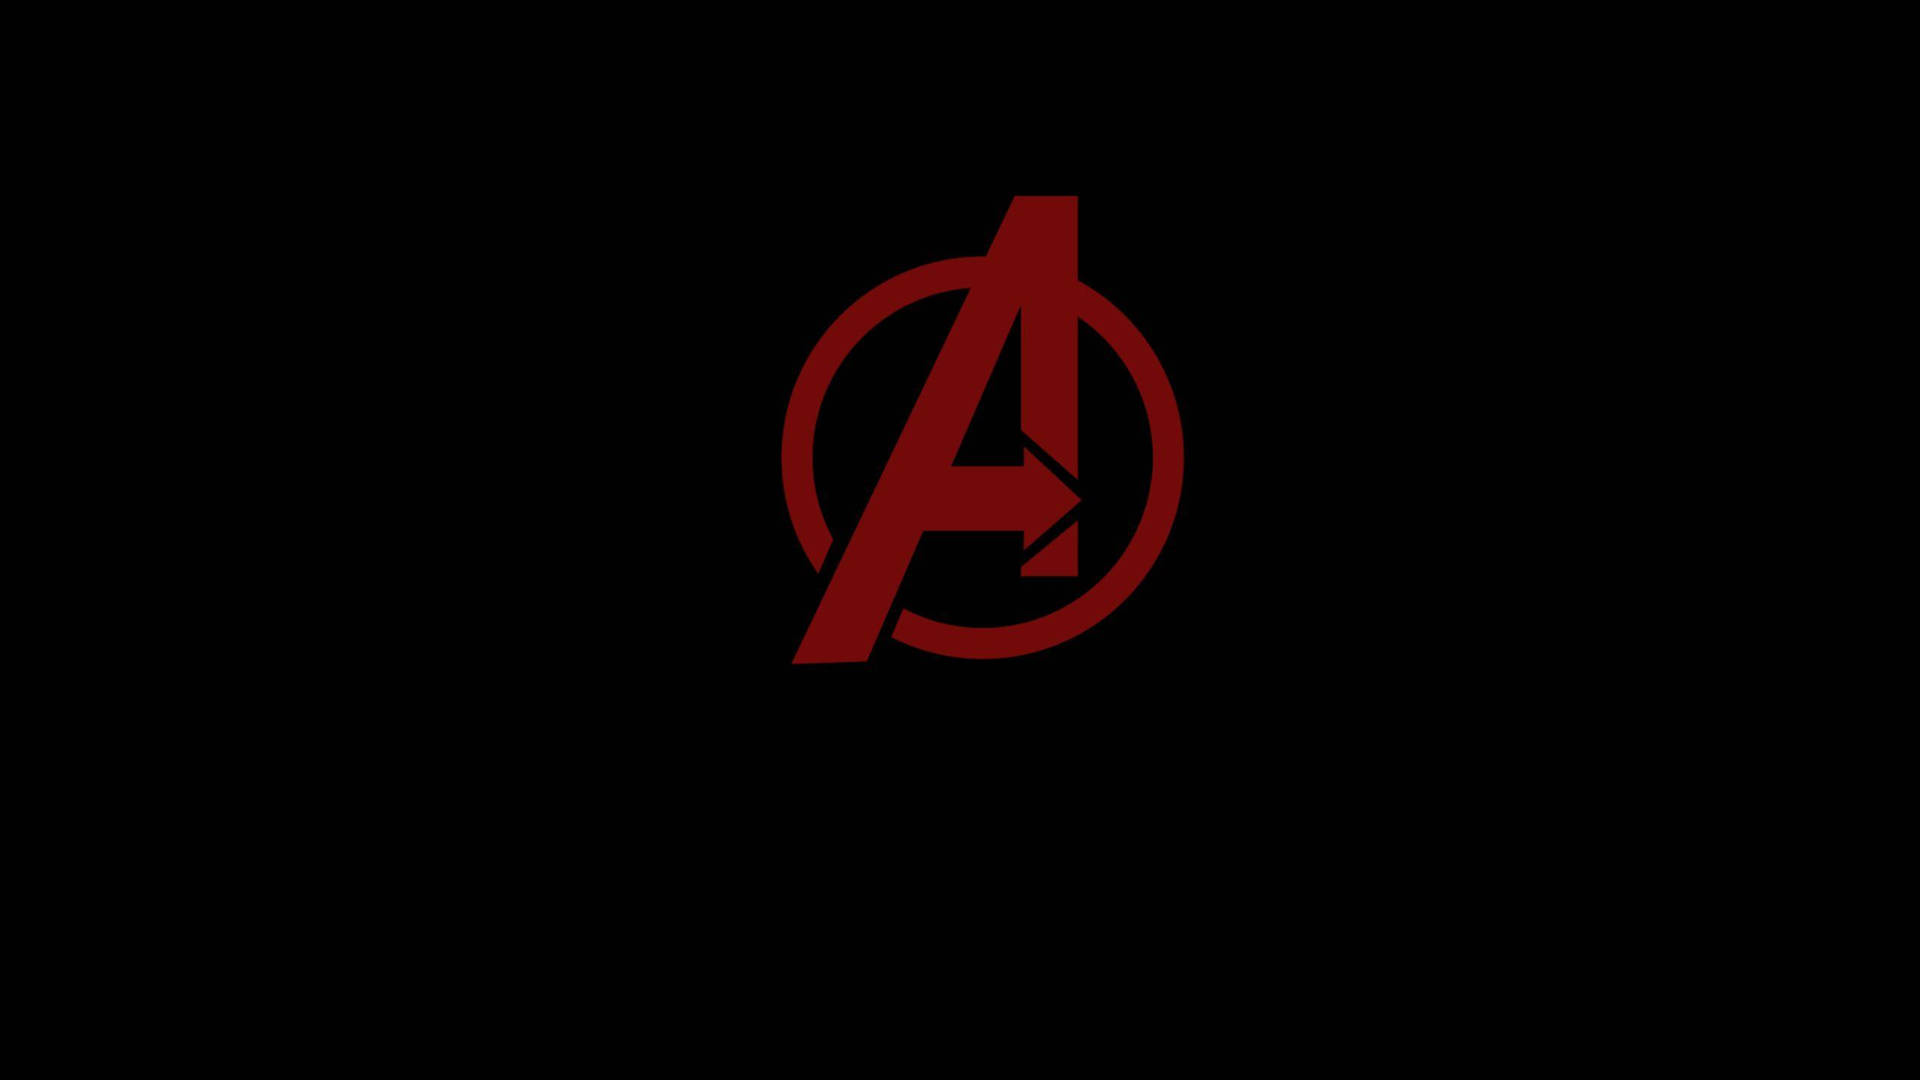 The Red Avengers Logo Background